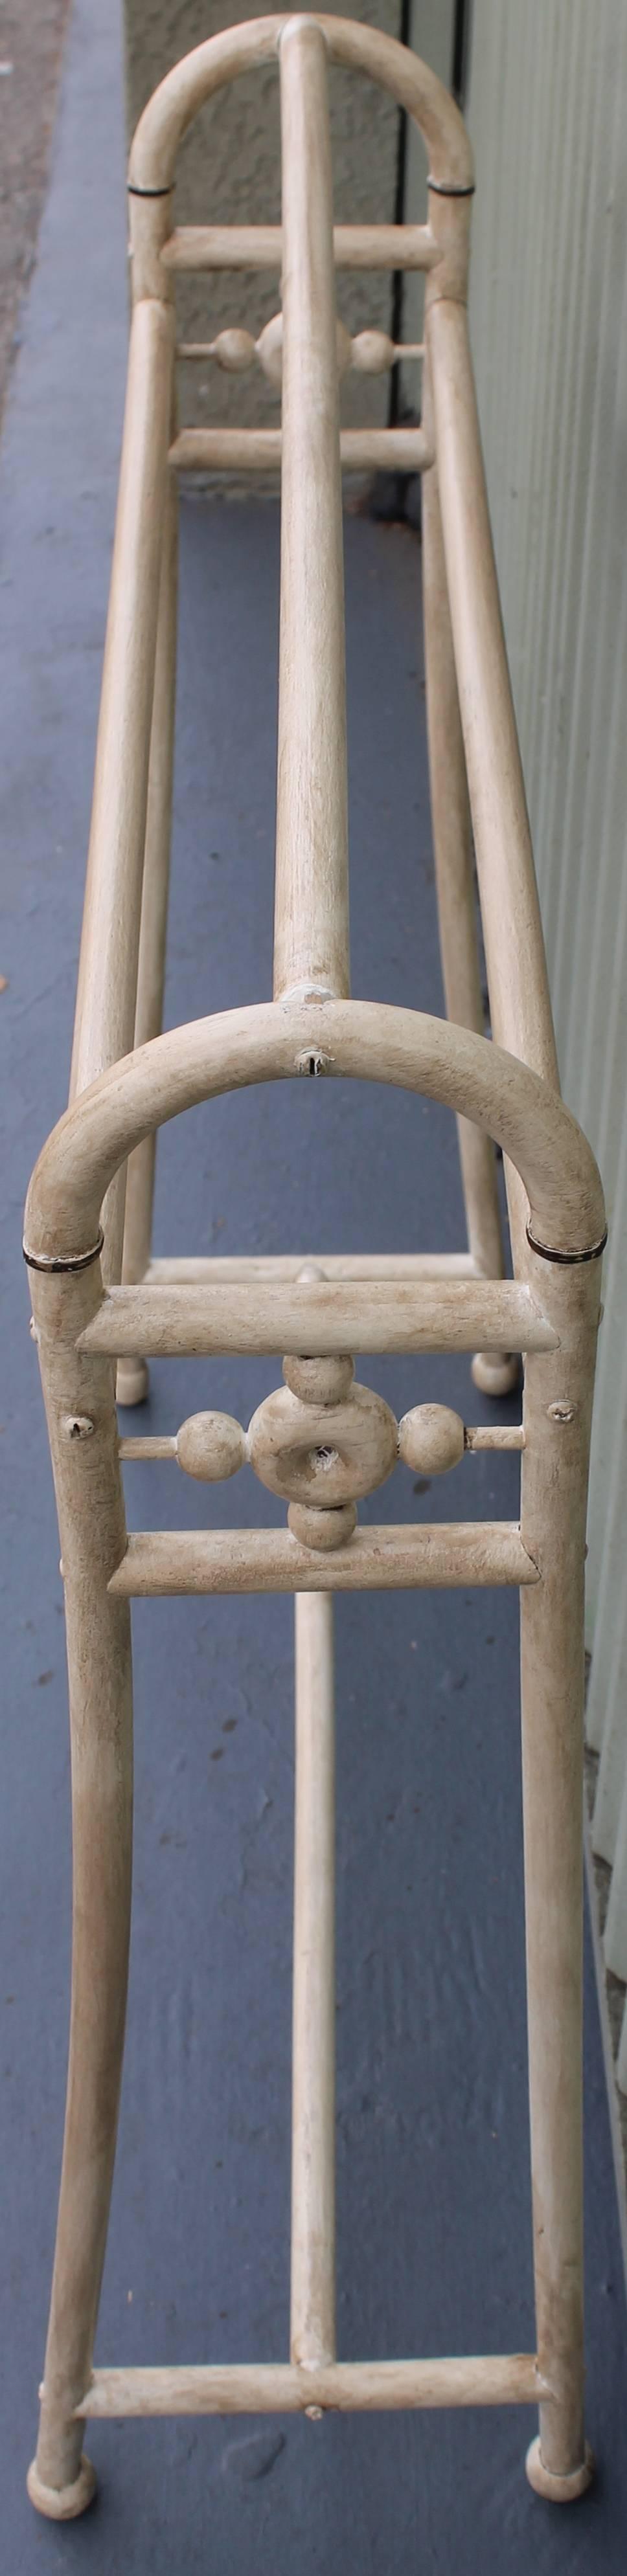 This wonderful cream painted quilt rack is in a nice mellow distressed painted surface. It is very sturdy and has all the original hardware. It holds three quilts or blankets.